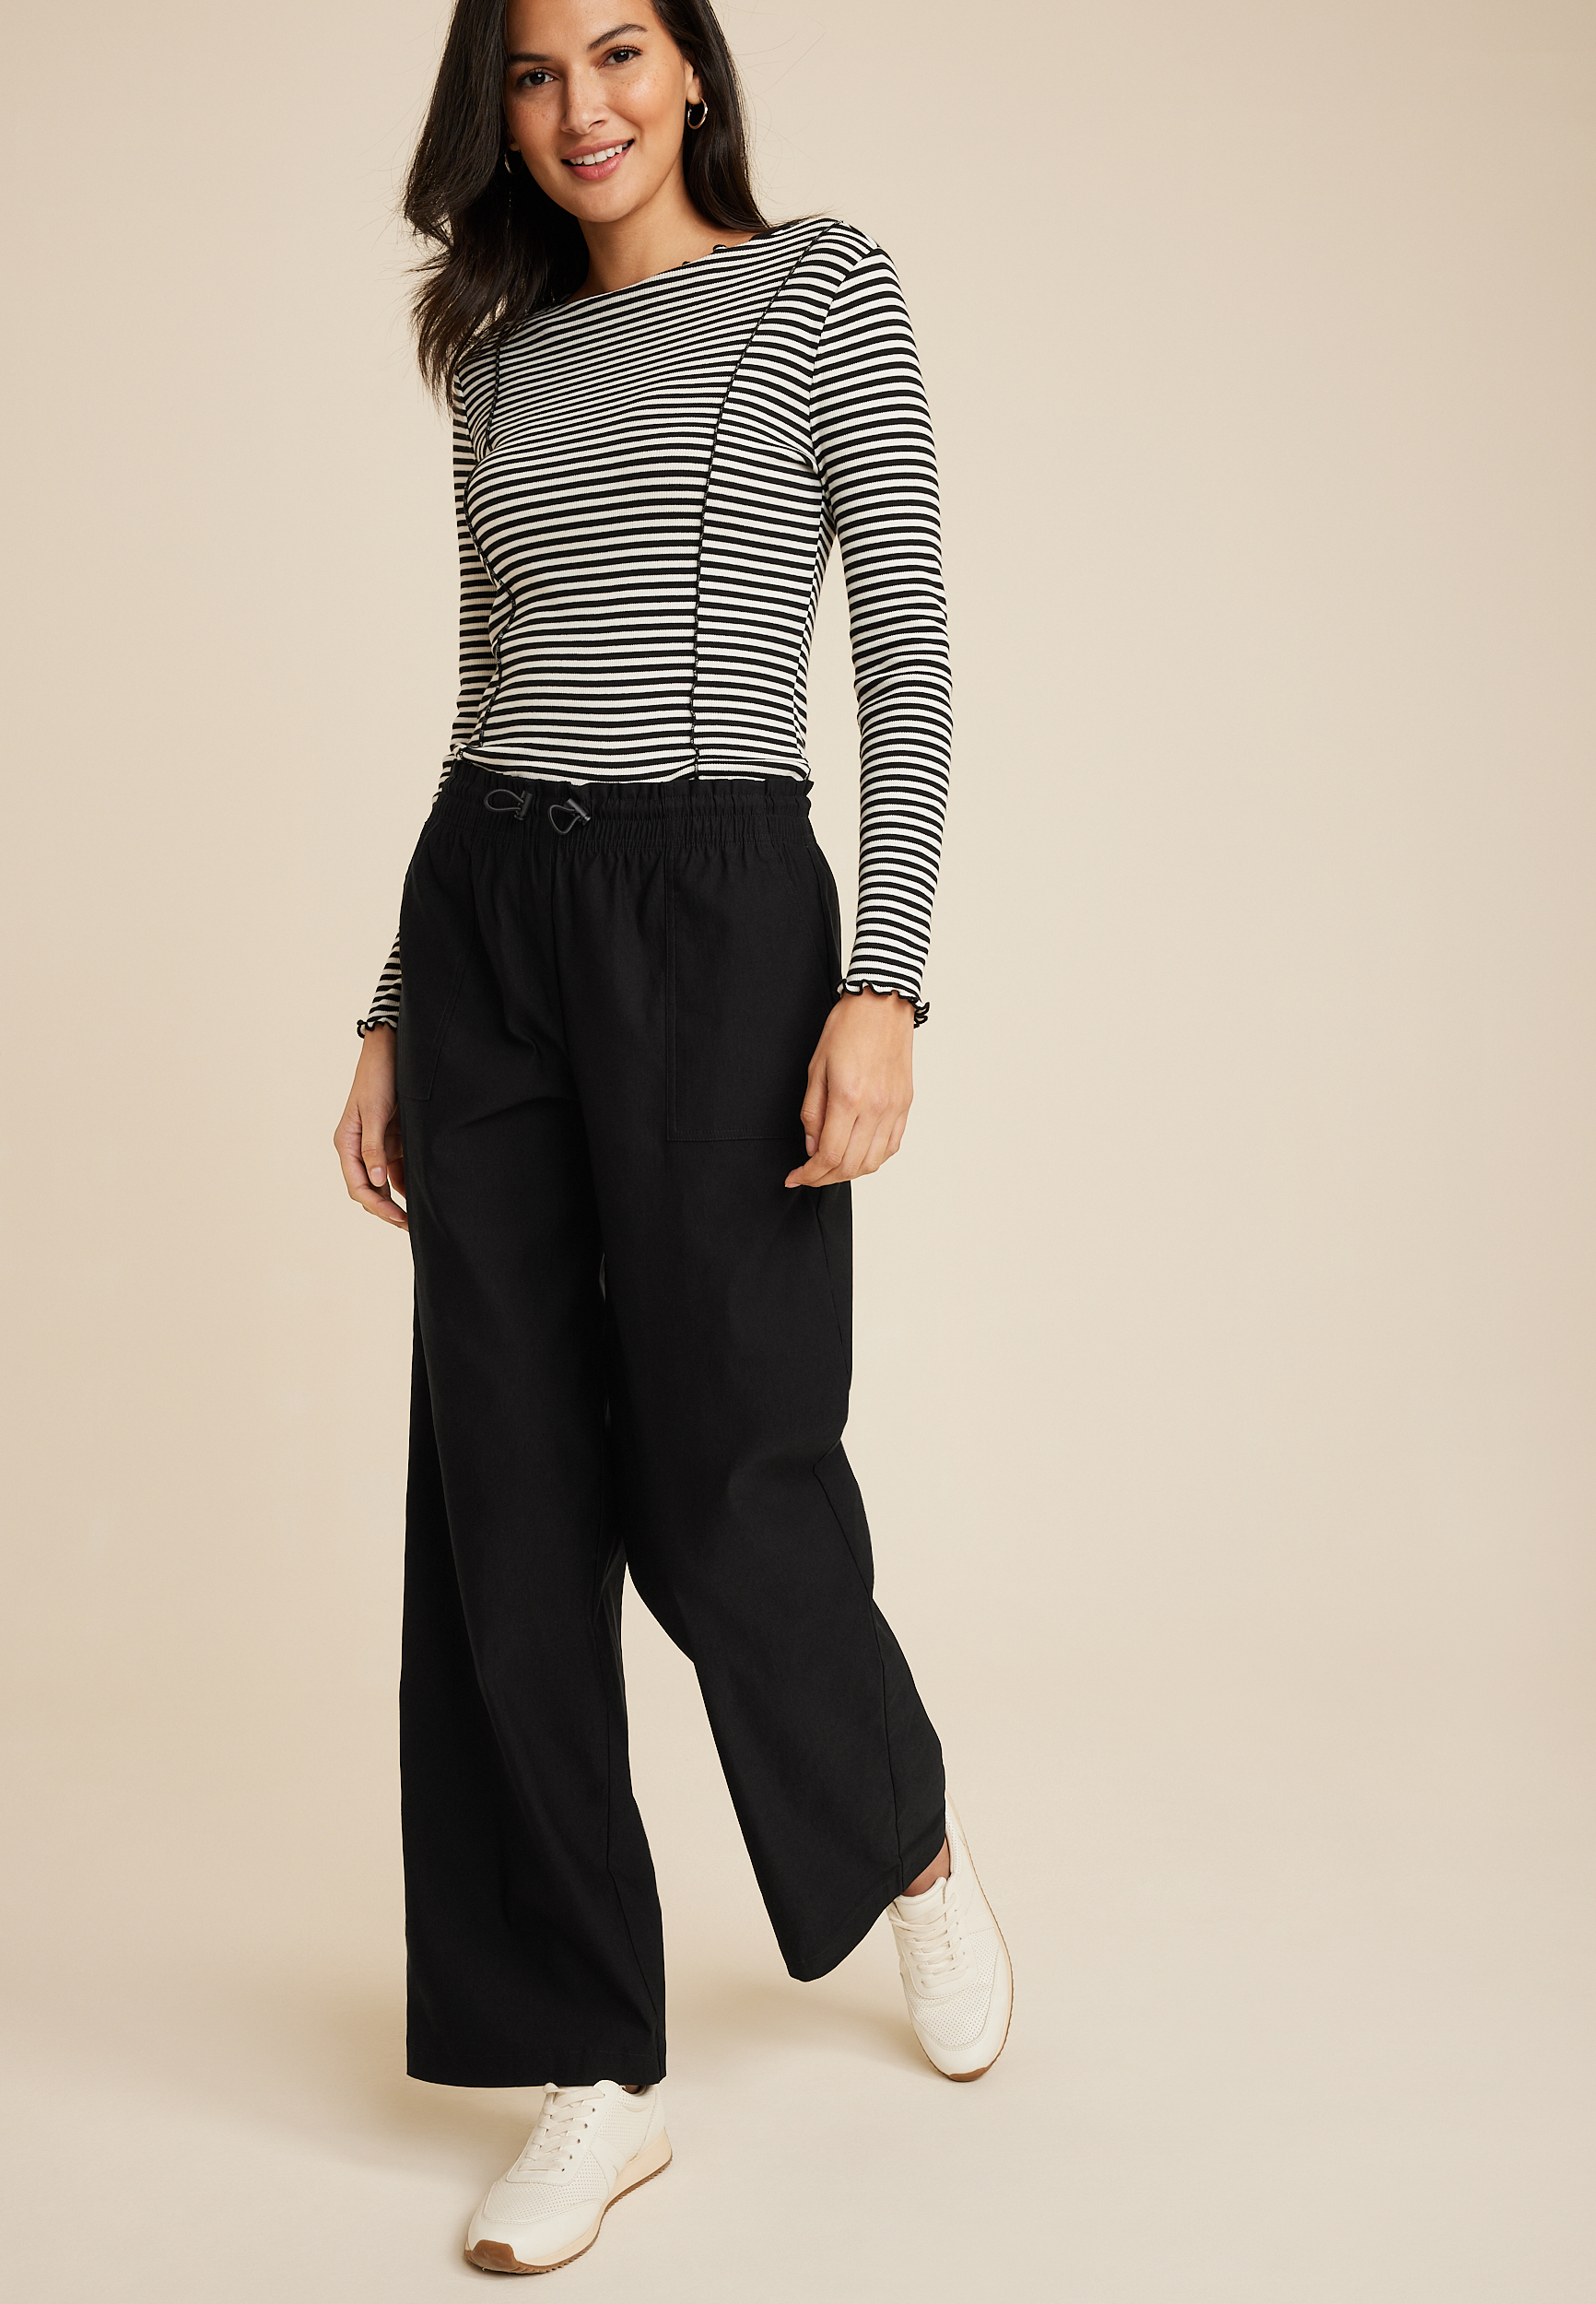 Buy Black Trousers & Pants for Women by WUXI Online